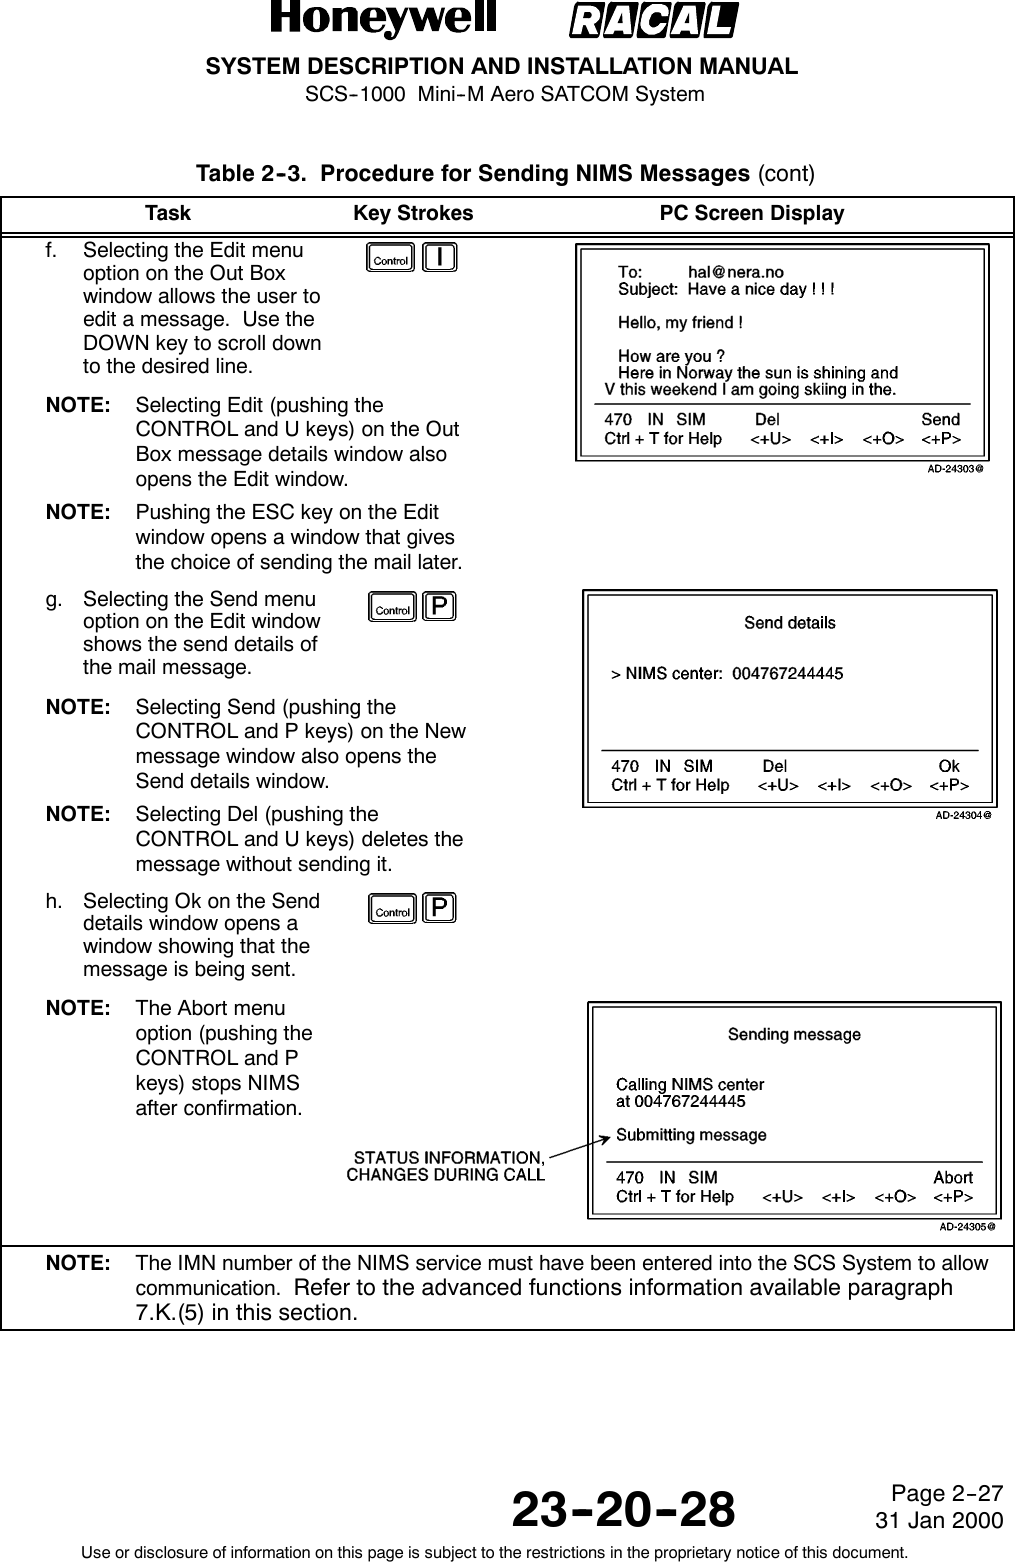 SYSTEM DESCRIPTION AND INSTALLATION MANUALSCS--1000 Mini--M Aero SATCOM System23--20--28Use or disclosure of information on this page is subject to the restrictions in the proprietary notice of this document.Page 2--2731 Jan 2000Table 2--3. Procedure for Sending NIMS Messages (cont)Task PC Screen DisplayKey Strokesf. Selecting the Edit menuoption on the Out Boxwindow allows the user toedit a message. Use theDOWN key to scroll downto the desired line.NOTE: Selecting Edit (pushing theCONTROL and U keys) on the OutBox message details window alsoopens the Edit window.NOTE: Pushing the ESC key on the Editwindow opens a window that givesthe choice of sending the mail later.g. Selecting the Send menuoption on the Edit windowshows the send details ofthe mail message.NOTE: Selecting Send (pushing theCONTROL and P keys) on the Newmessage window also opens theSend details window.NOTE: Selecting Del (pushing theCONTROL and U keys) deletes themessage without sending it.h. Selecting Ok on the Senddetails window opens awindow showing that themessage is being sent.NOTE: The Abort menuoption (pushing theCONTROL and Pkeys) stops NIMSafter confirmation.NOTE: The IMN number of the NIMS service must have been entered into the SCS System to allowcommunication. Refer to the advanced functions information available paragraph7.K.(5) in this section.